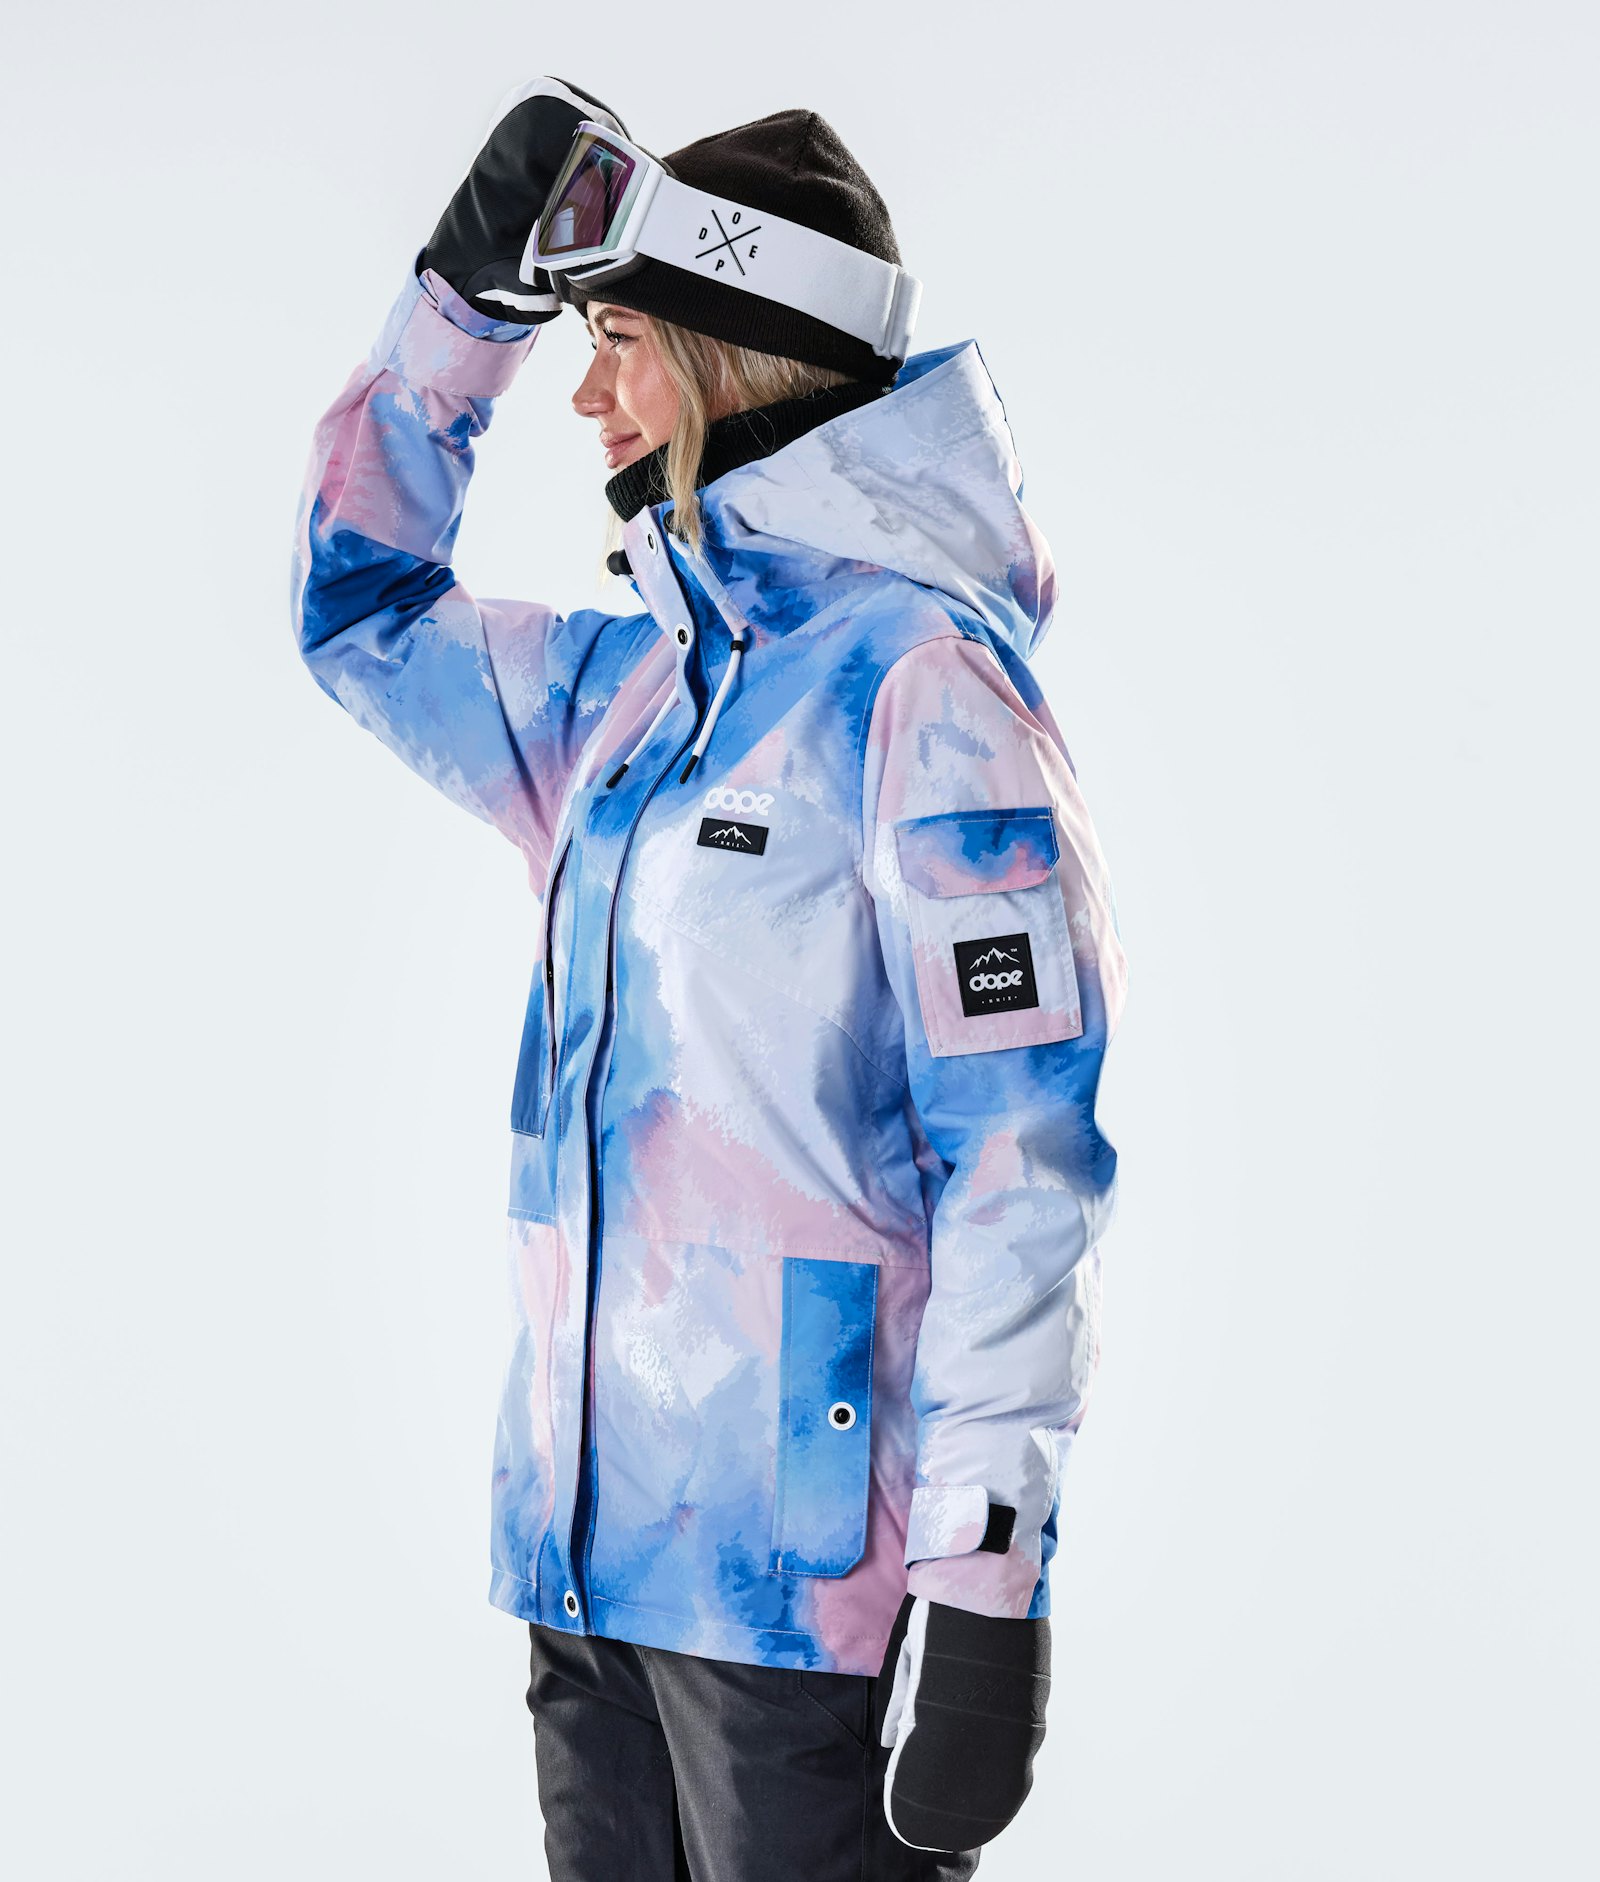 Dope Adept W 2020 Giacca Sci Donna Cloud